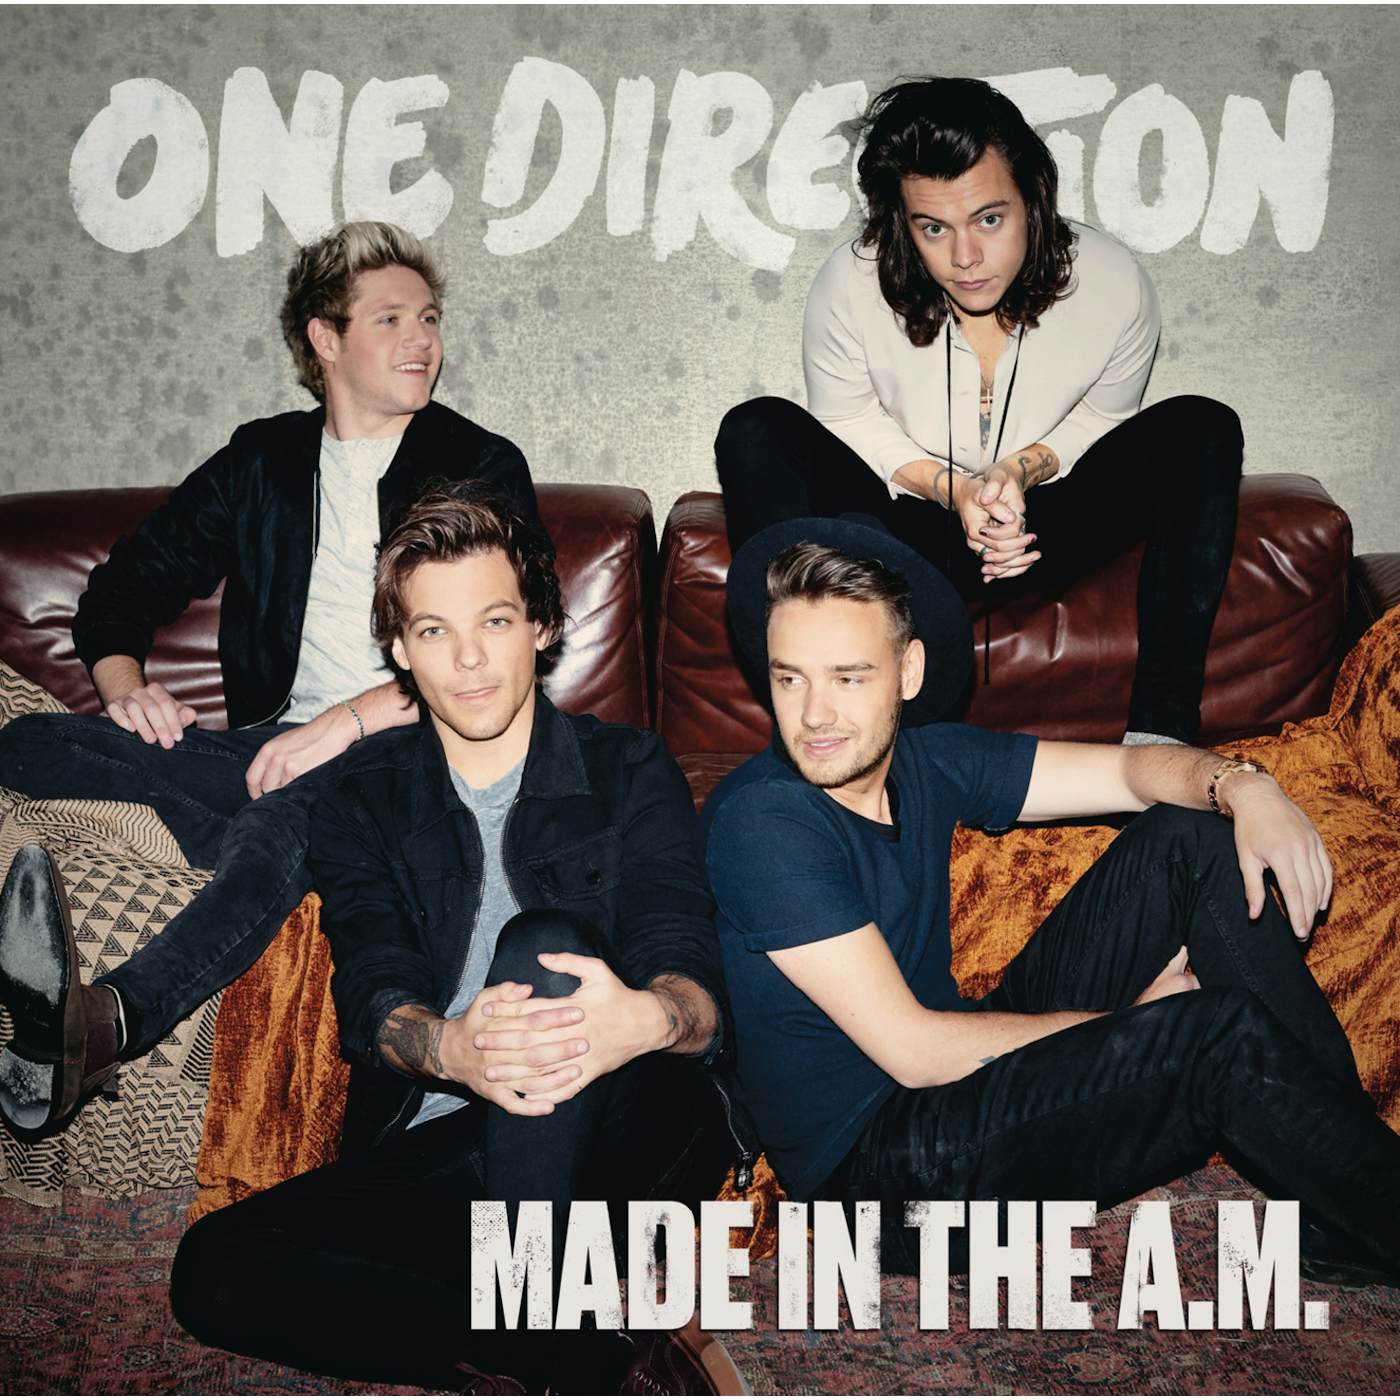 One Direction MADE IN THE A.M. CD